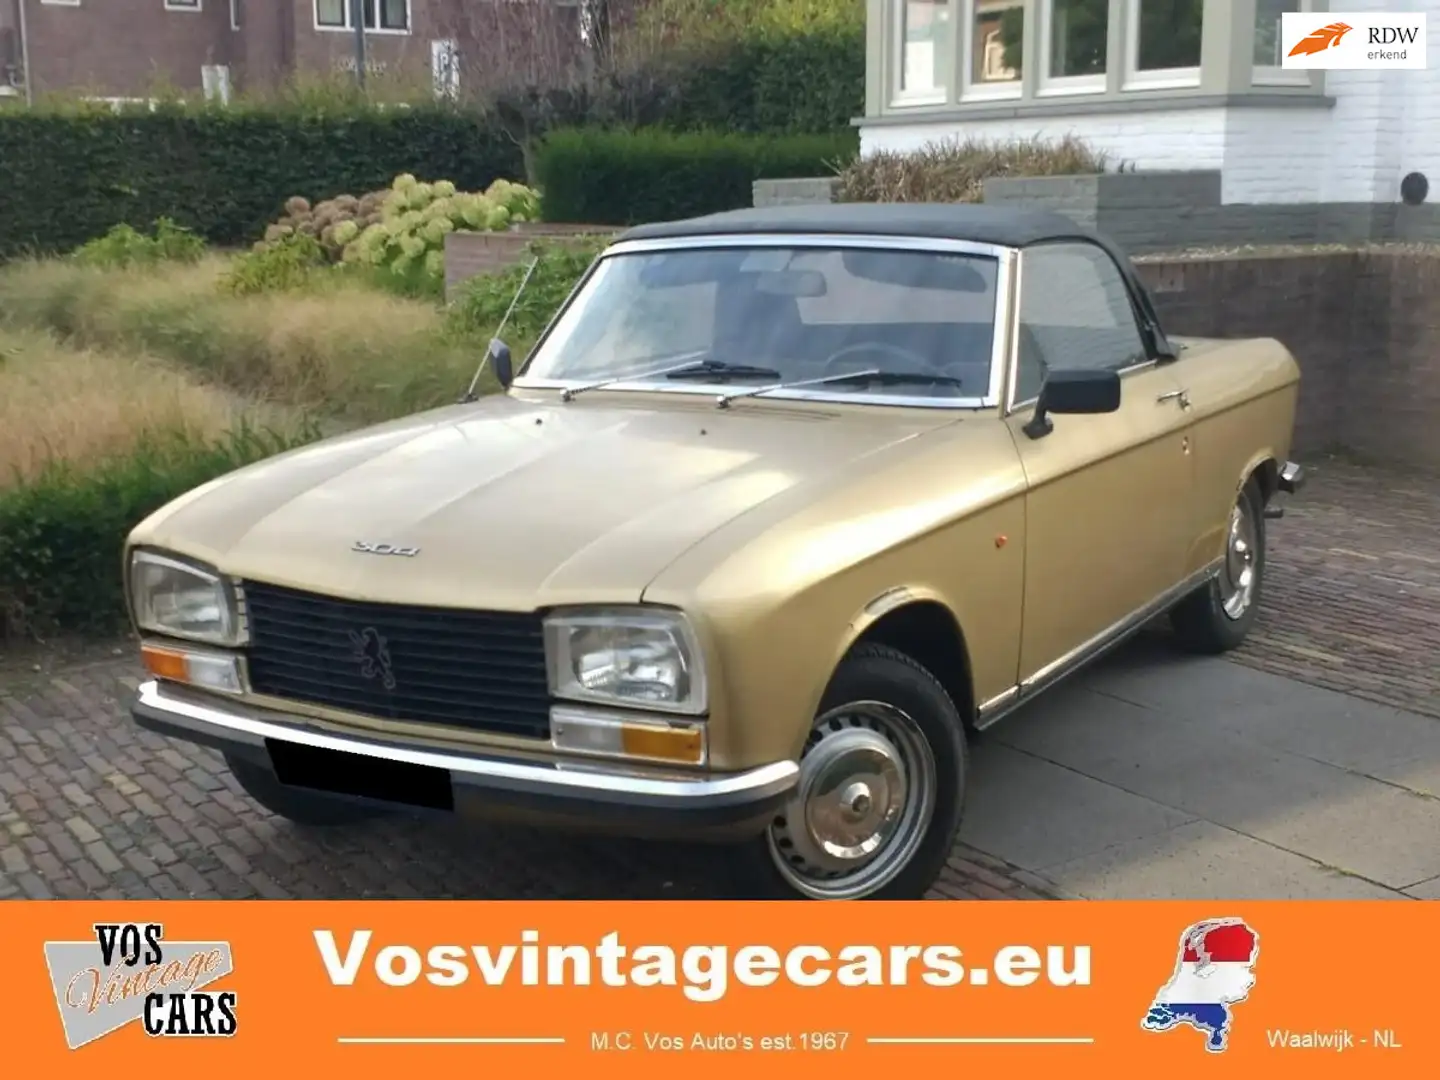 Peugeot 304 S Cabriolet - Project Gold - 1